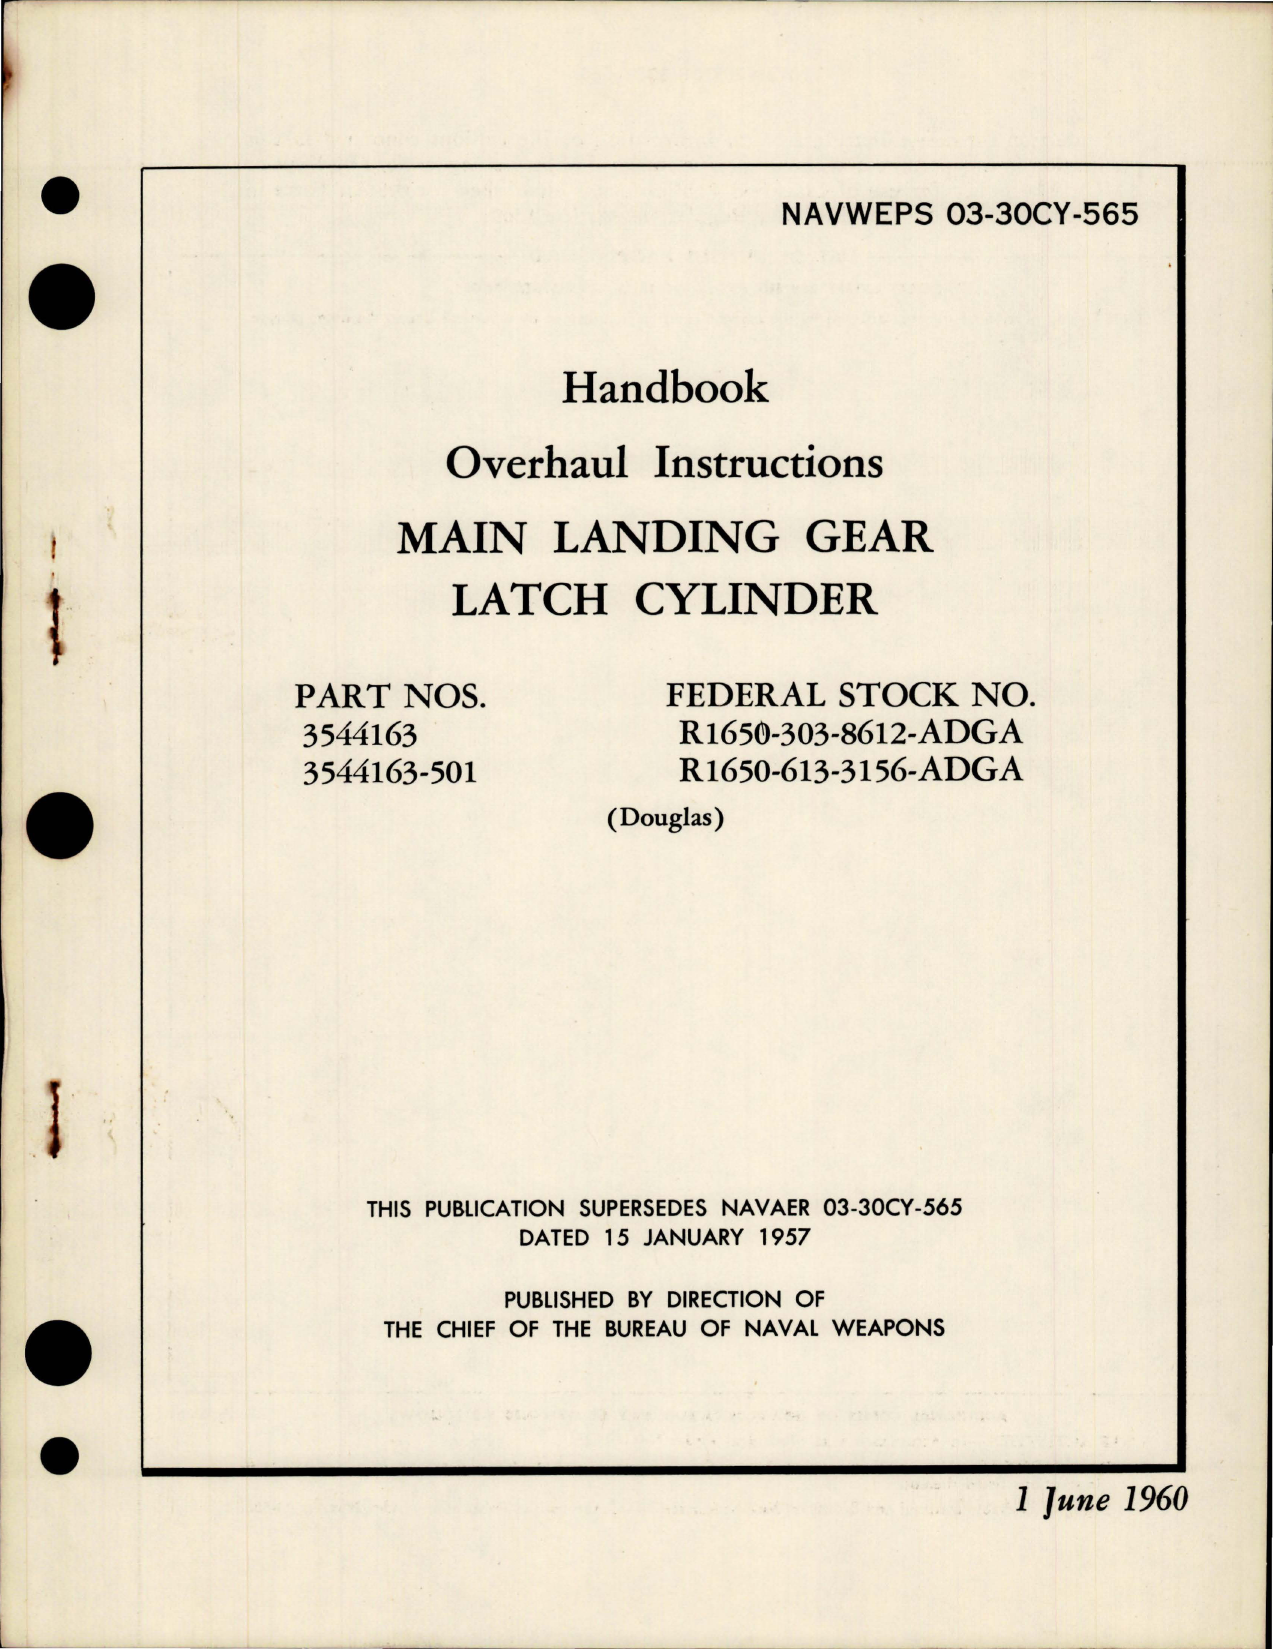 Sample page 1 from AirCorps Library document: Overhaul Instructions for Main Landing Gear Latch Cylinder - Parts 3544163 and 3544163-501 